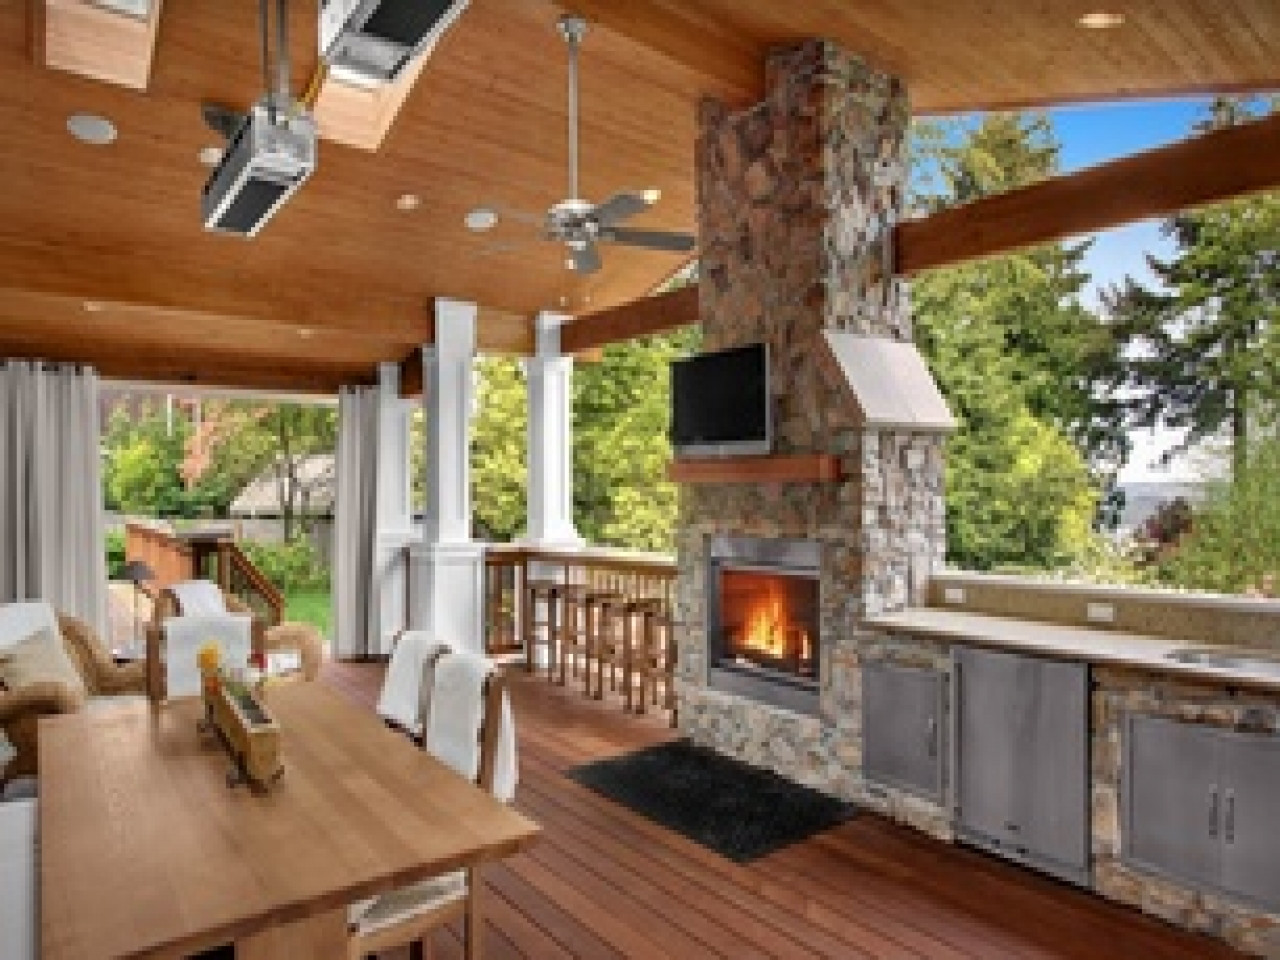 Outdoor Kitchen With Fireplace Designs
 Indoor porches outdoor kitchen designs with fireplace